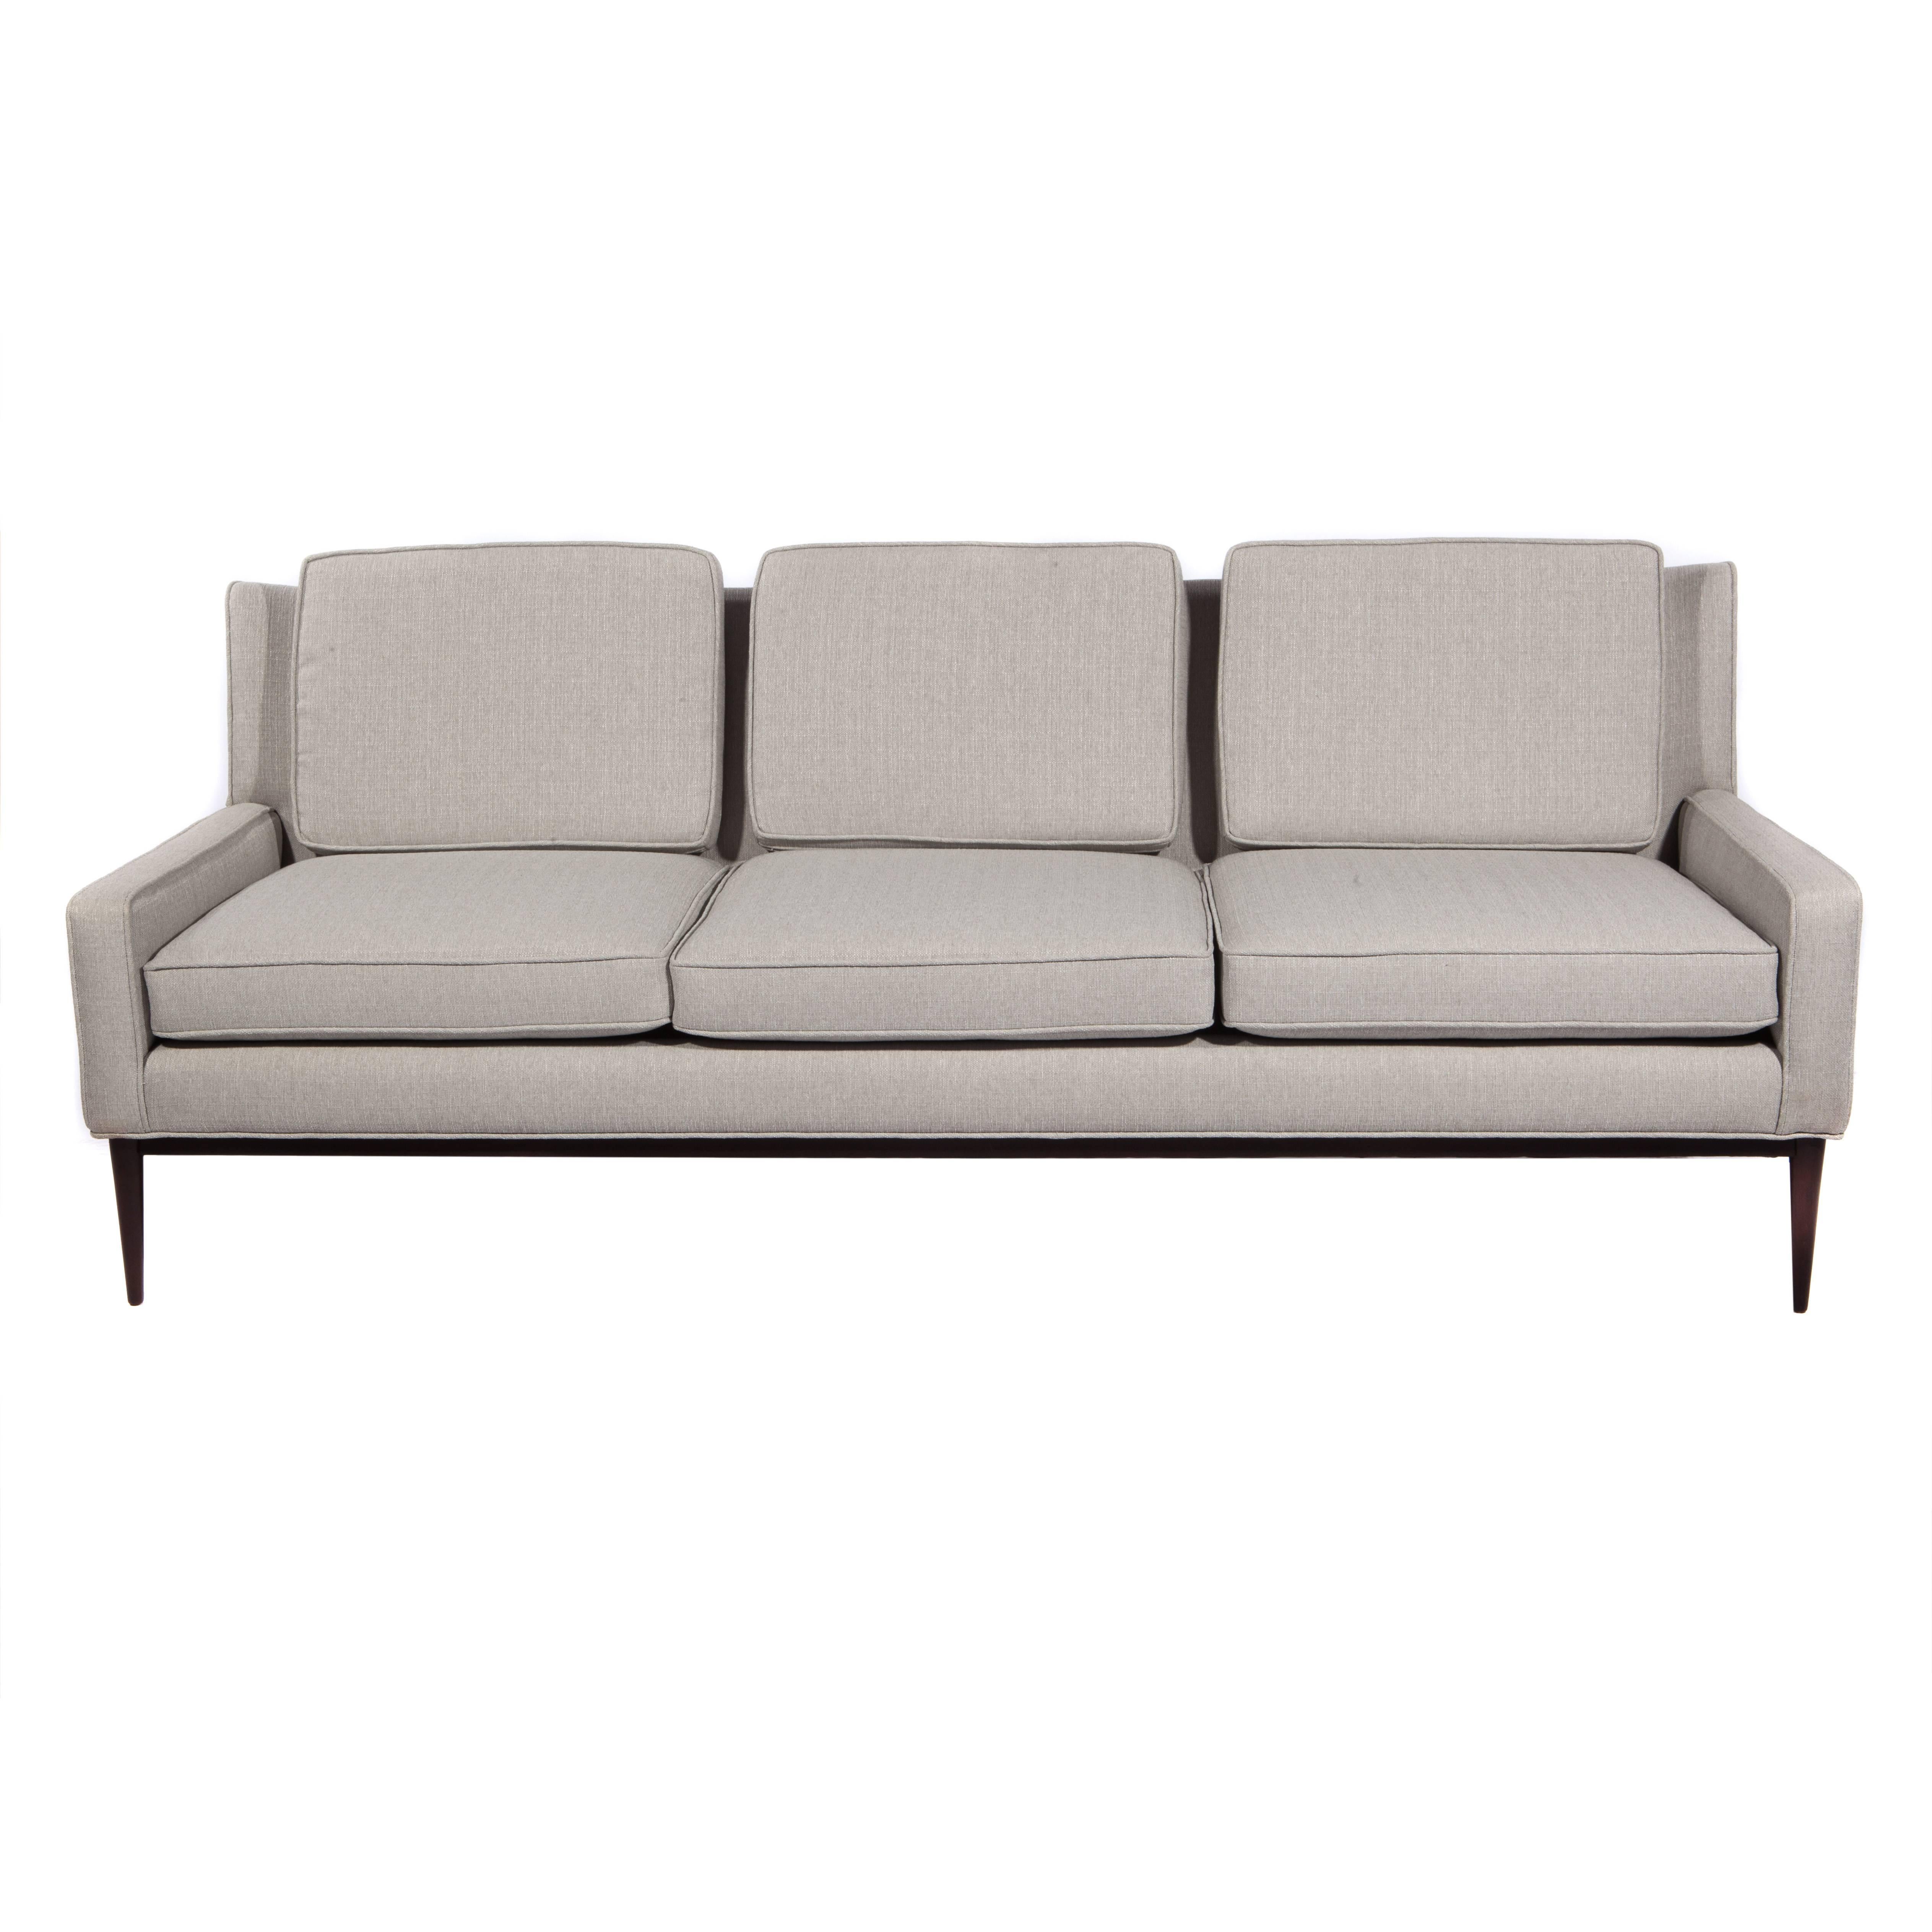 American Three-Seat Sofa by Paul McCobb for Directional, Circa 1950s For Sale